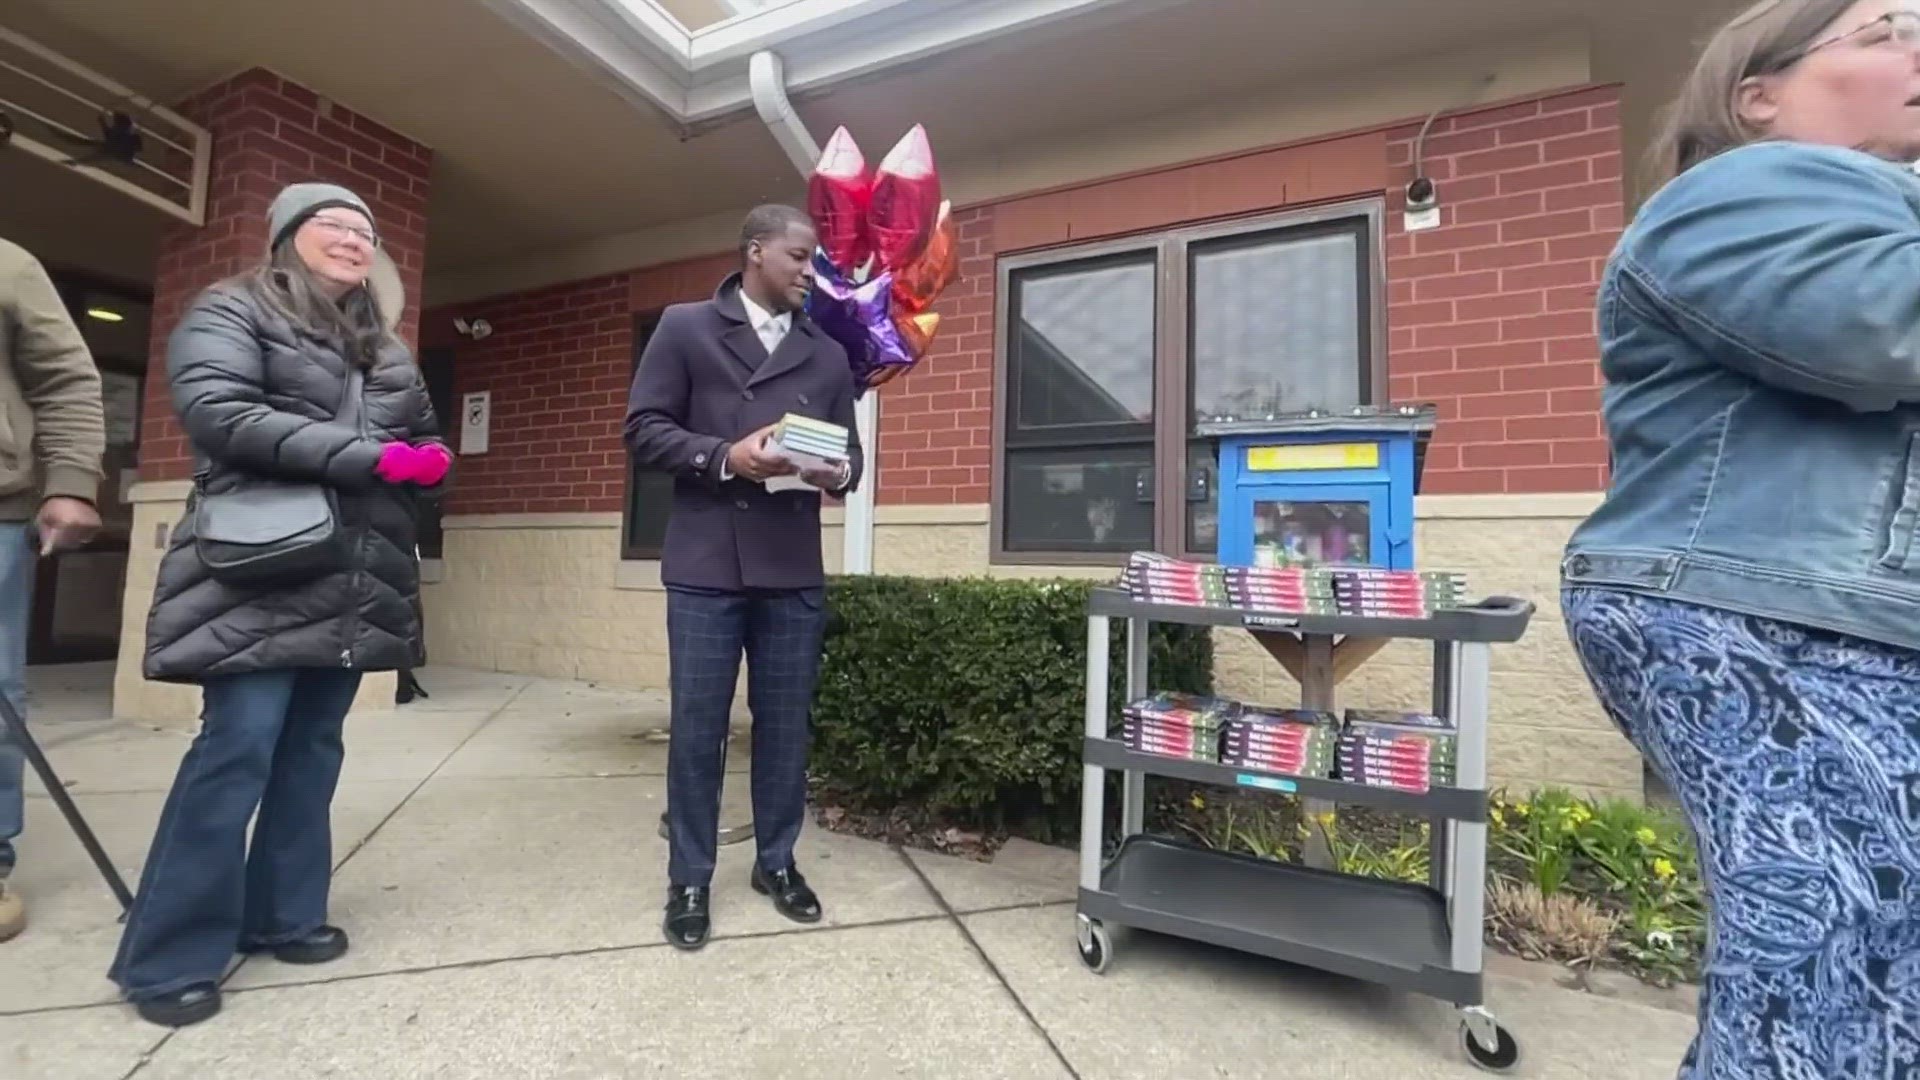 3News Anthony Copeland attends the unveiling at the DogMan Little Free Library at Riverside School in Cleveland.